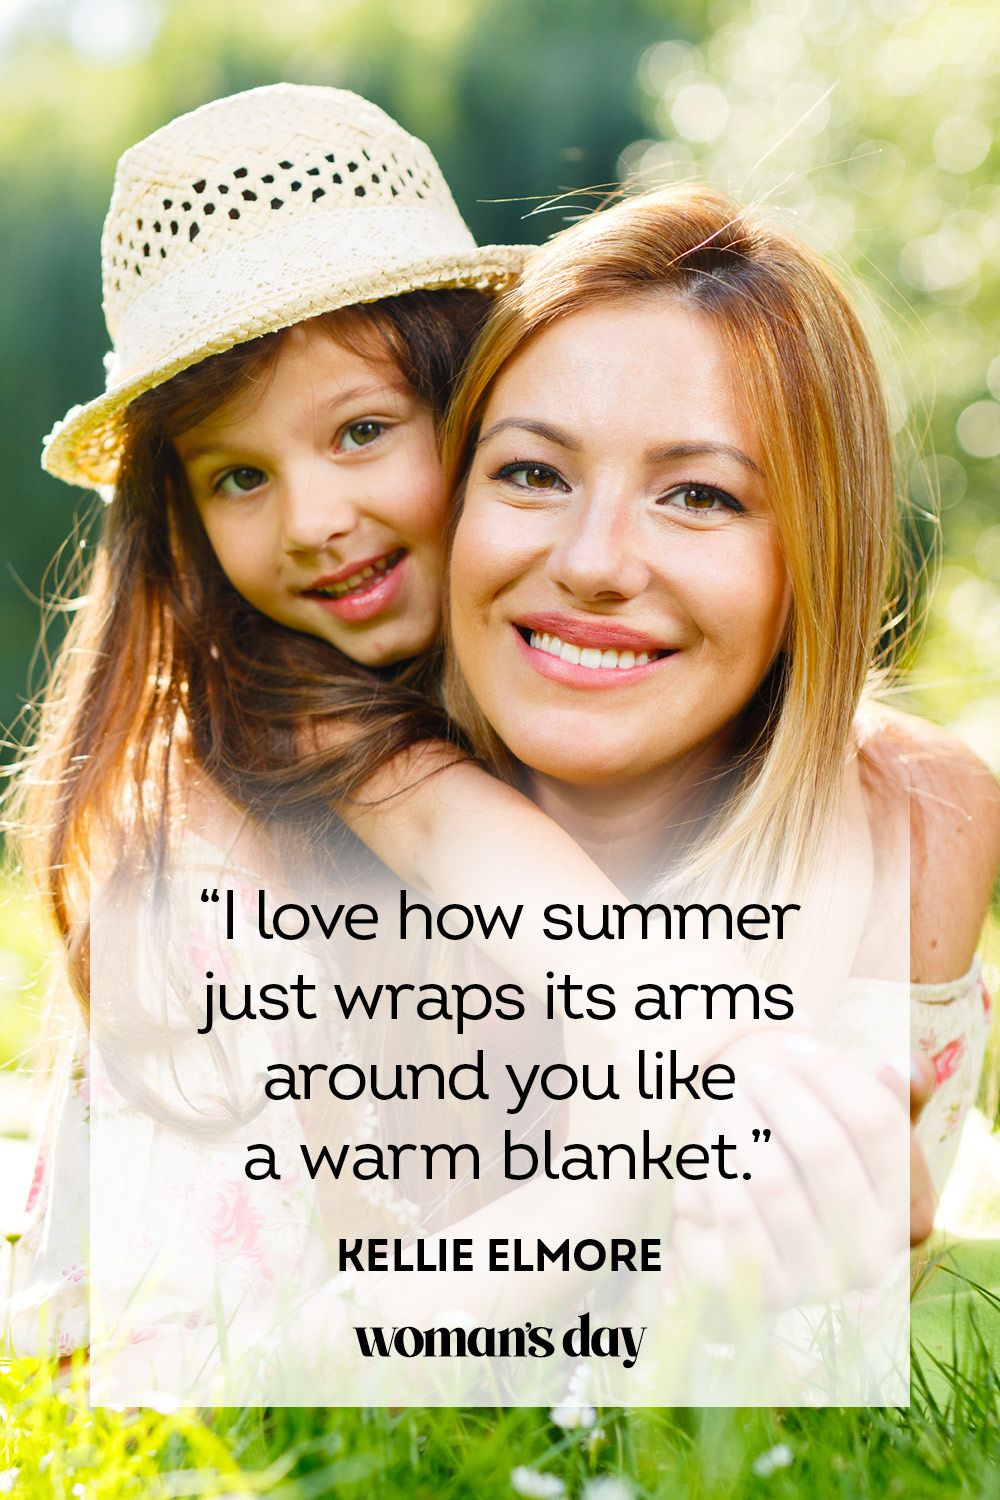 Best Summer Quotes Sayings & Quotes About Summertime